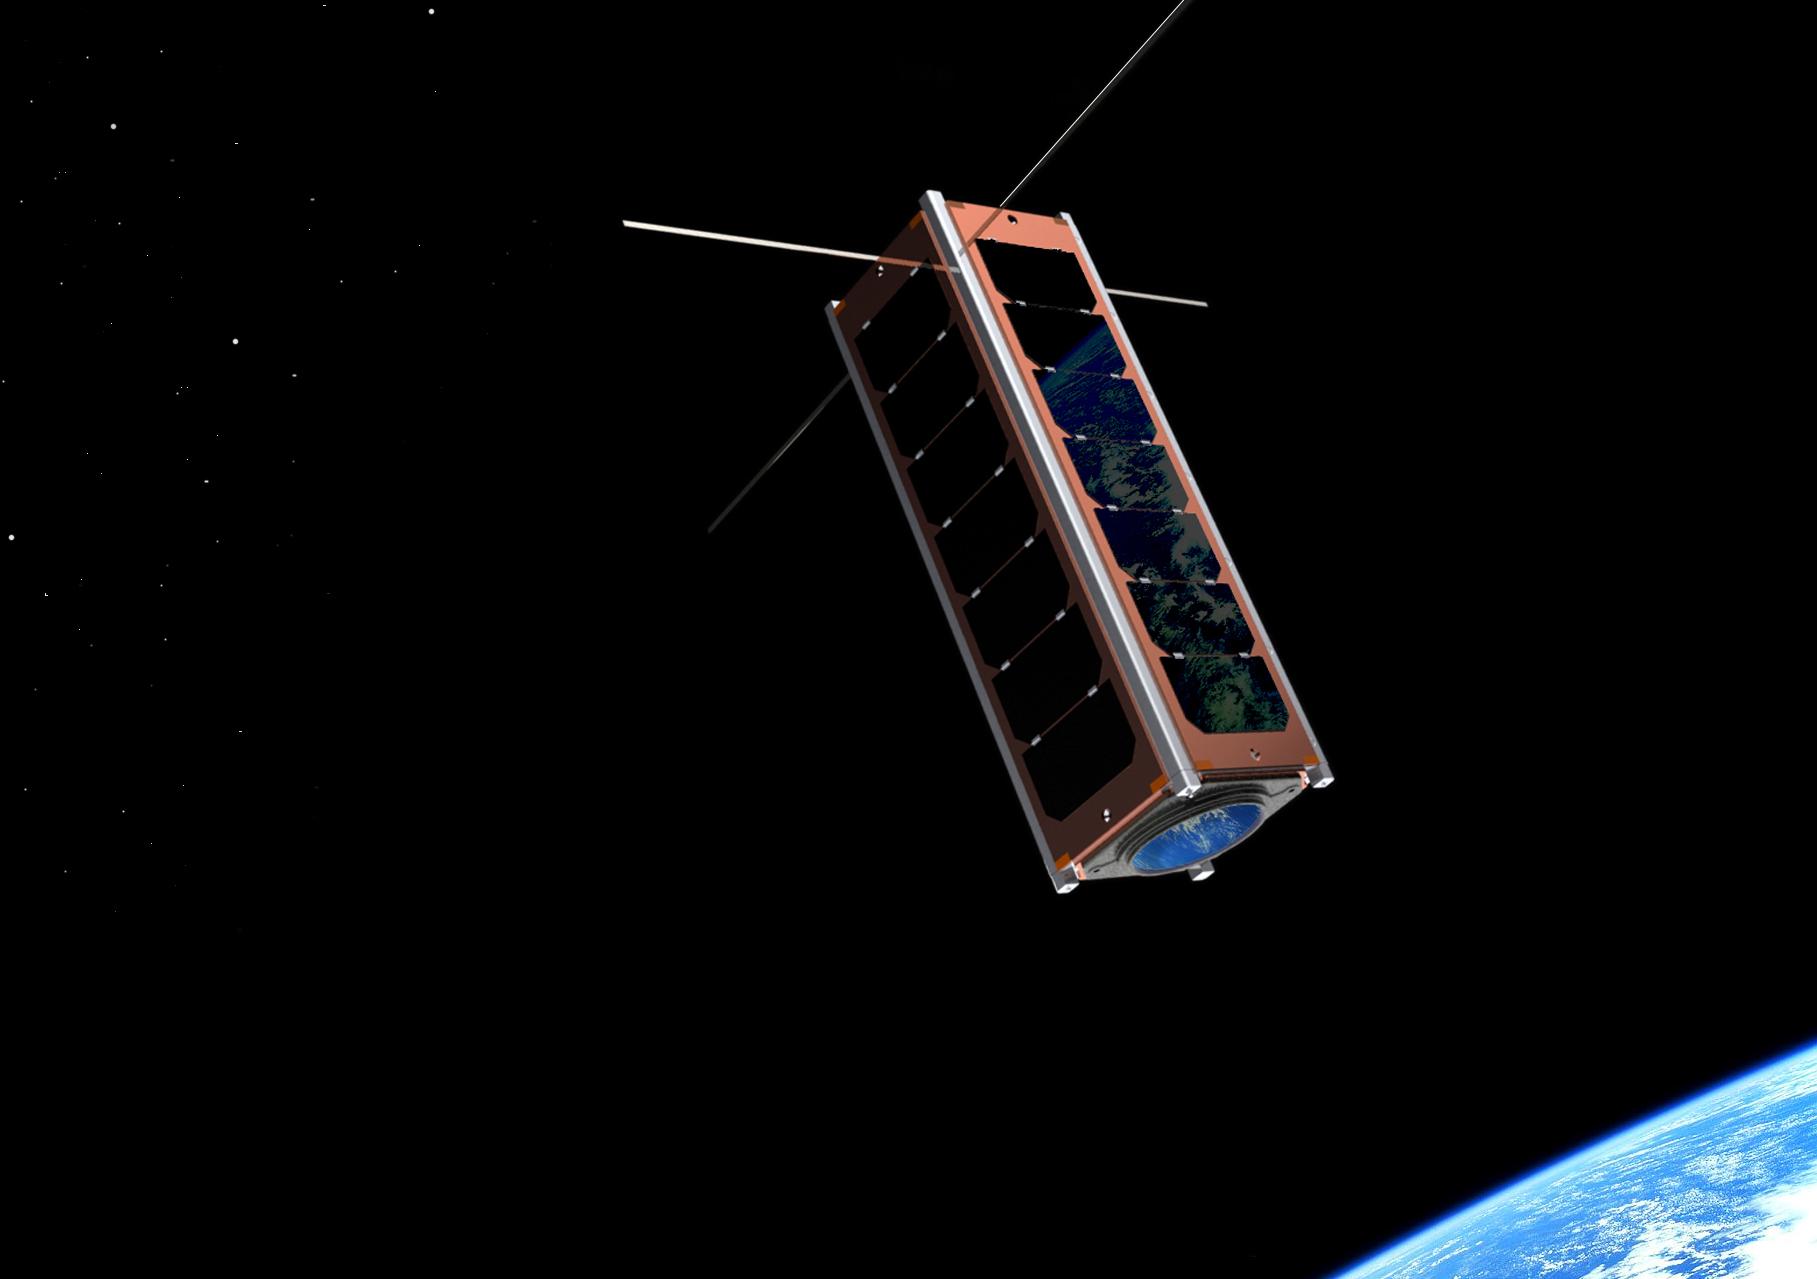 CubeSats are tiny, fully-functional satellites. Image credit: Clyde Space/NASA